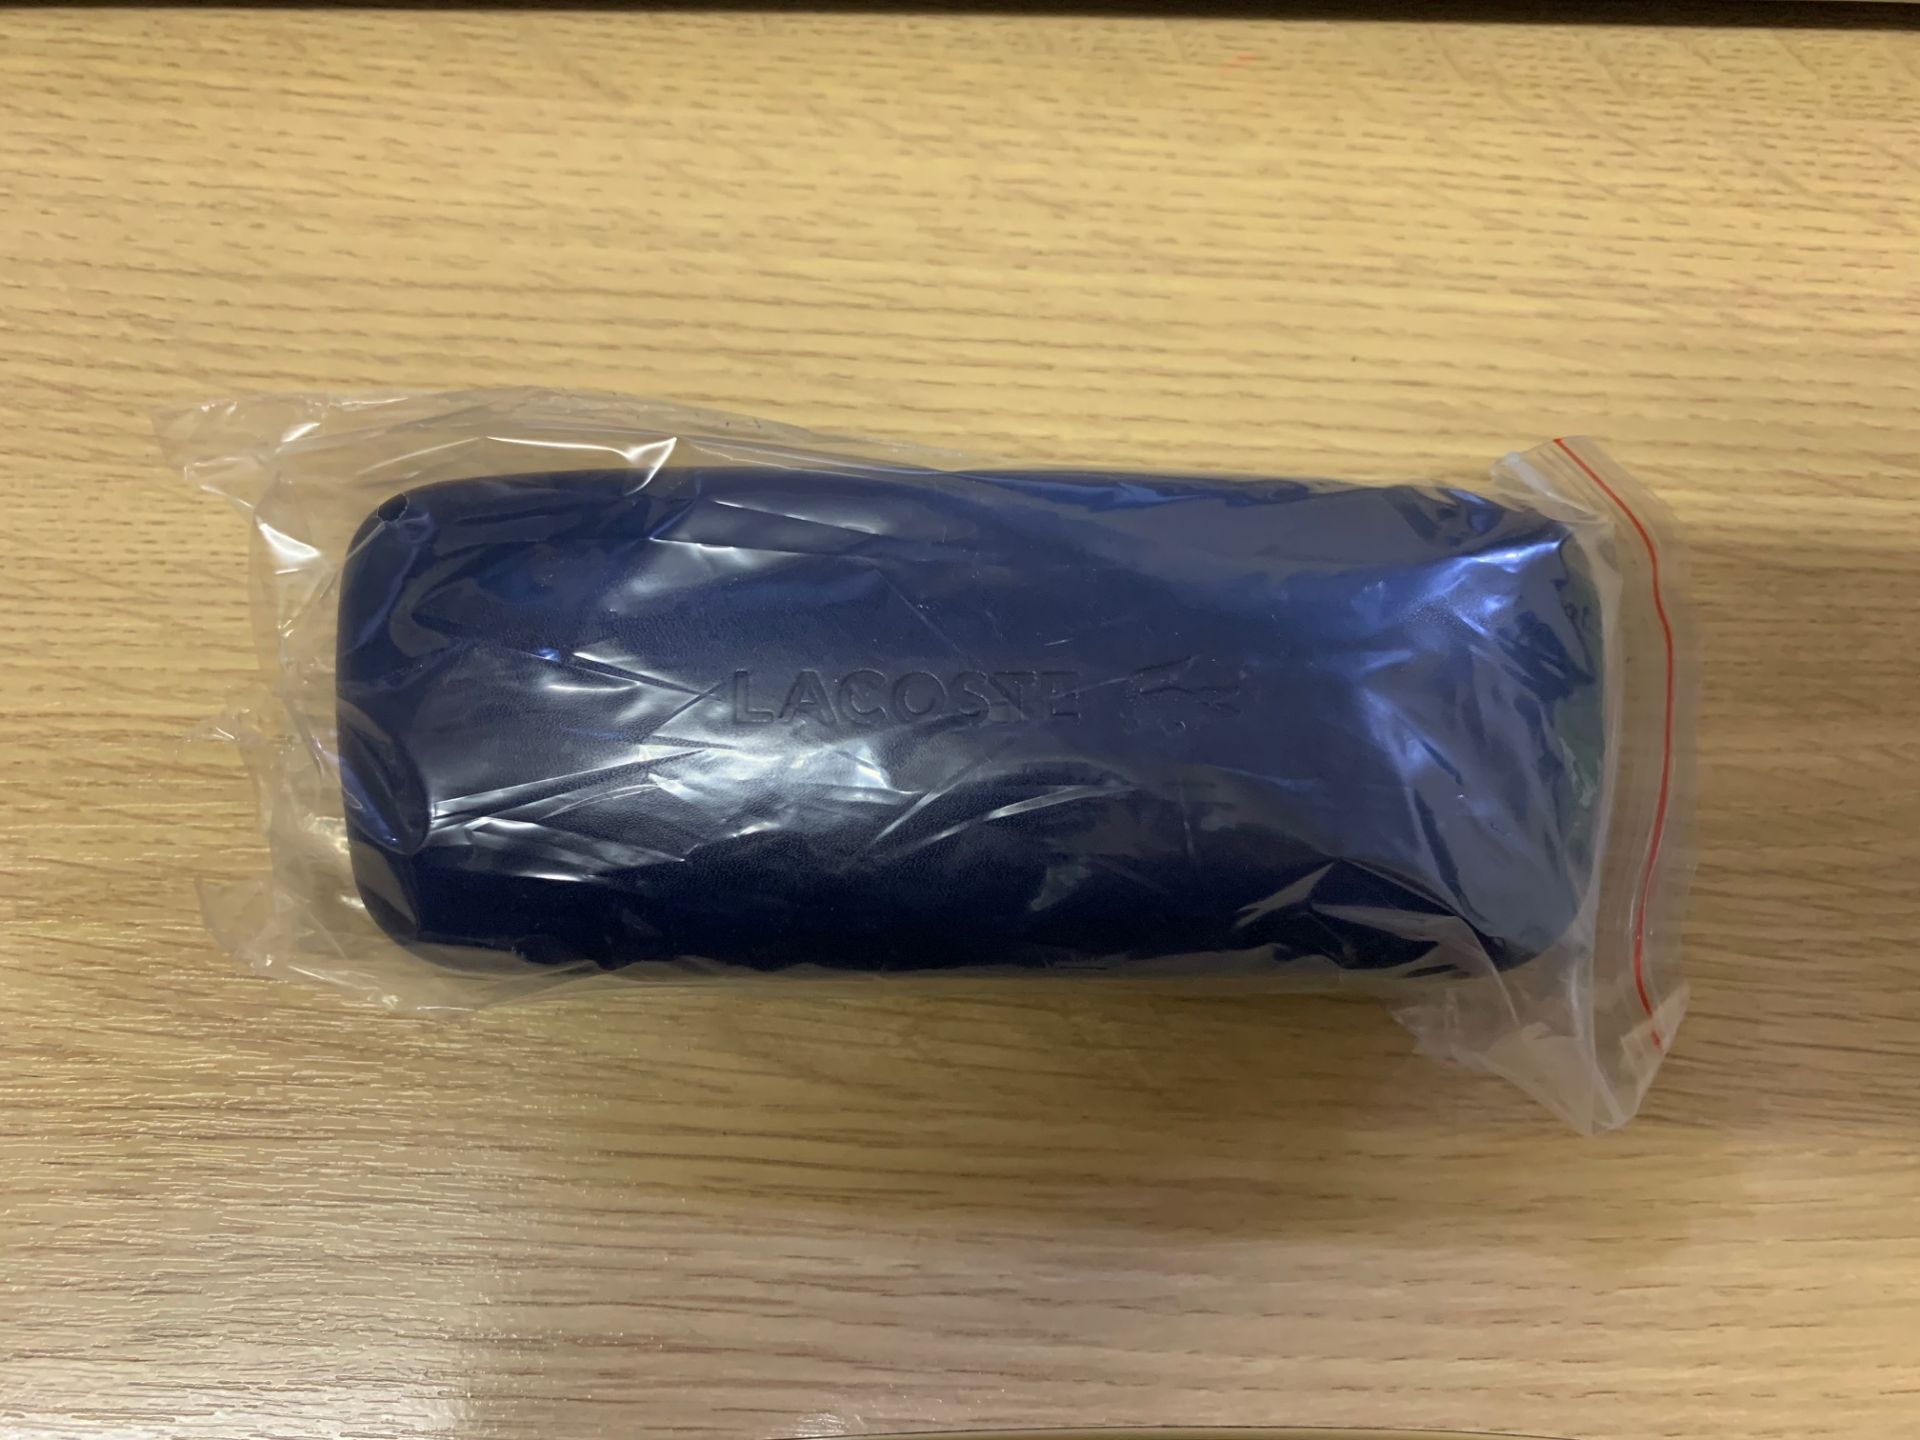 4 x Lacoste Glasses Case Blue (Brand New) - Image 3 of 3